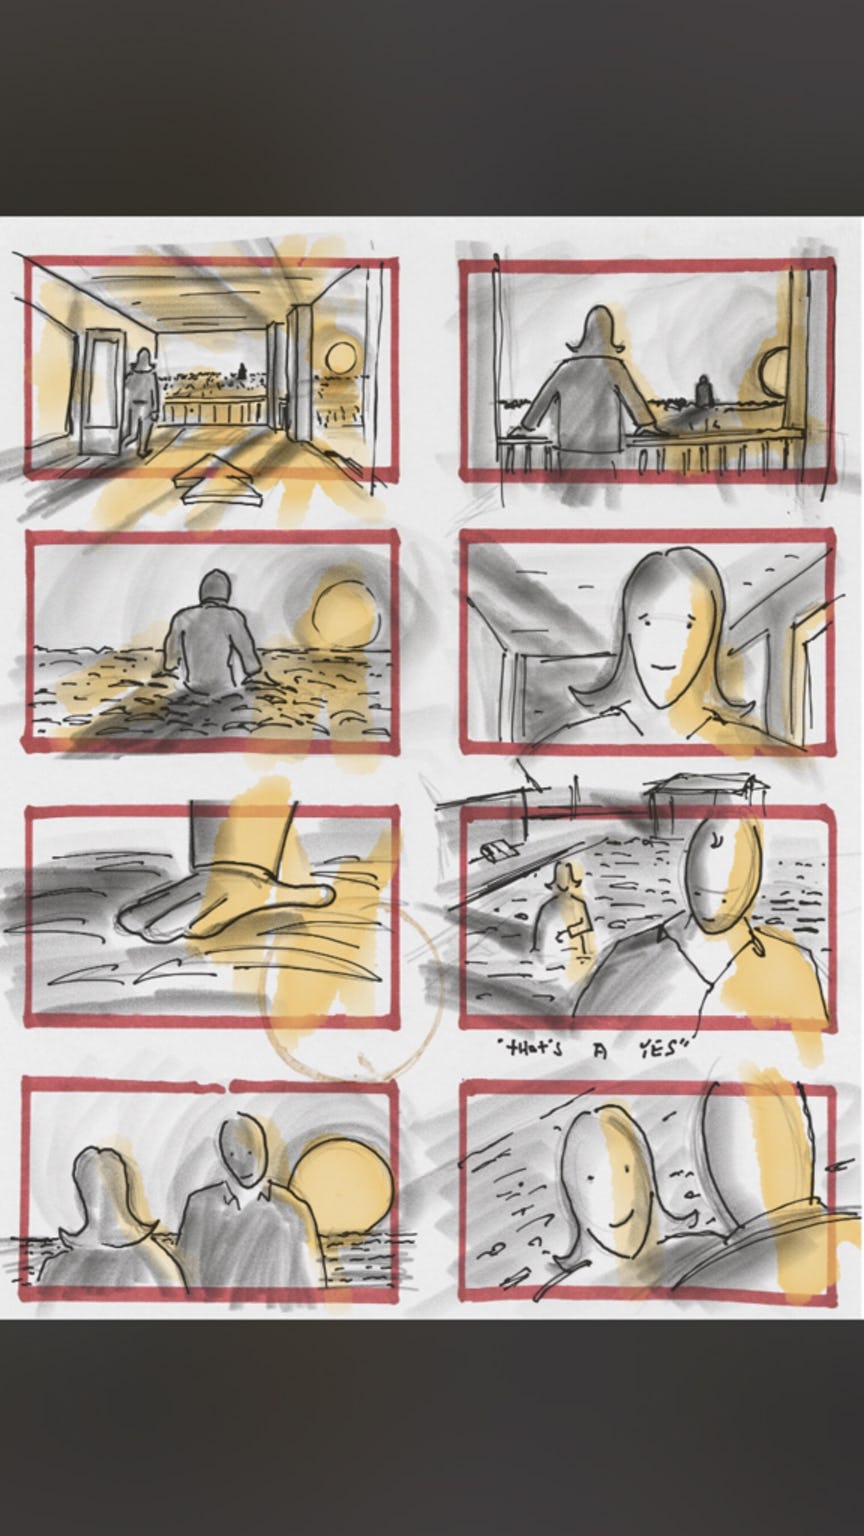 justice-league-lois-lane-clark-kent-dream-sequence-storyboard-1034998